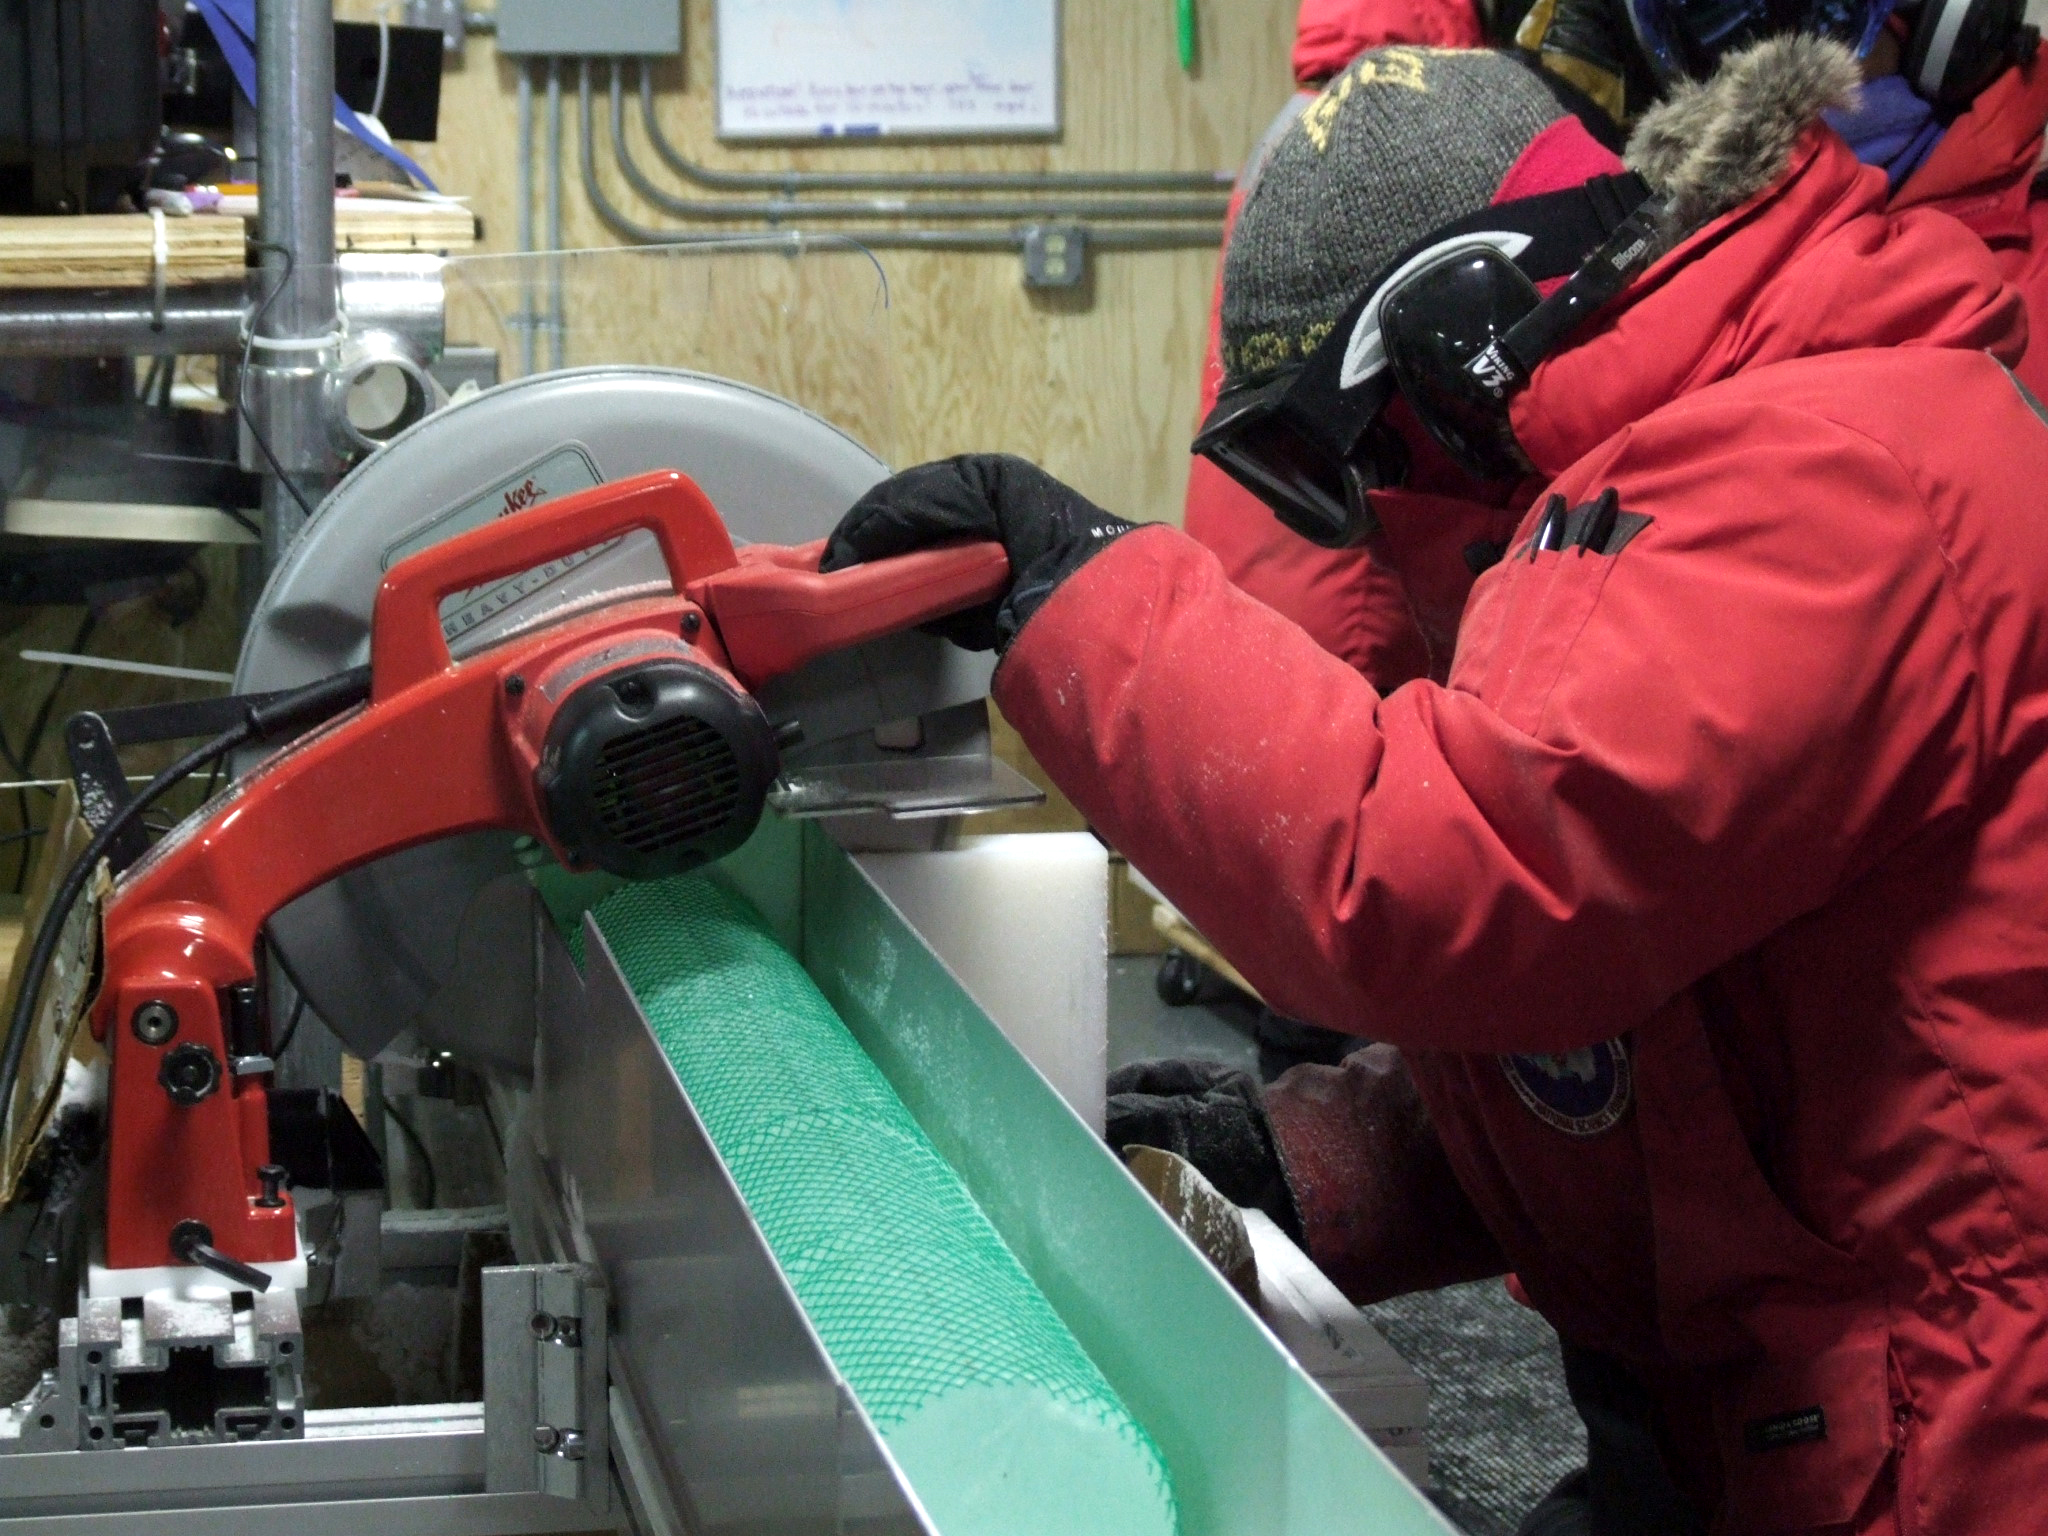 A person saws an ice core.